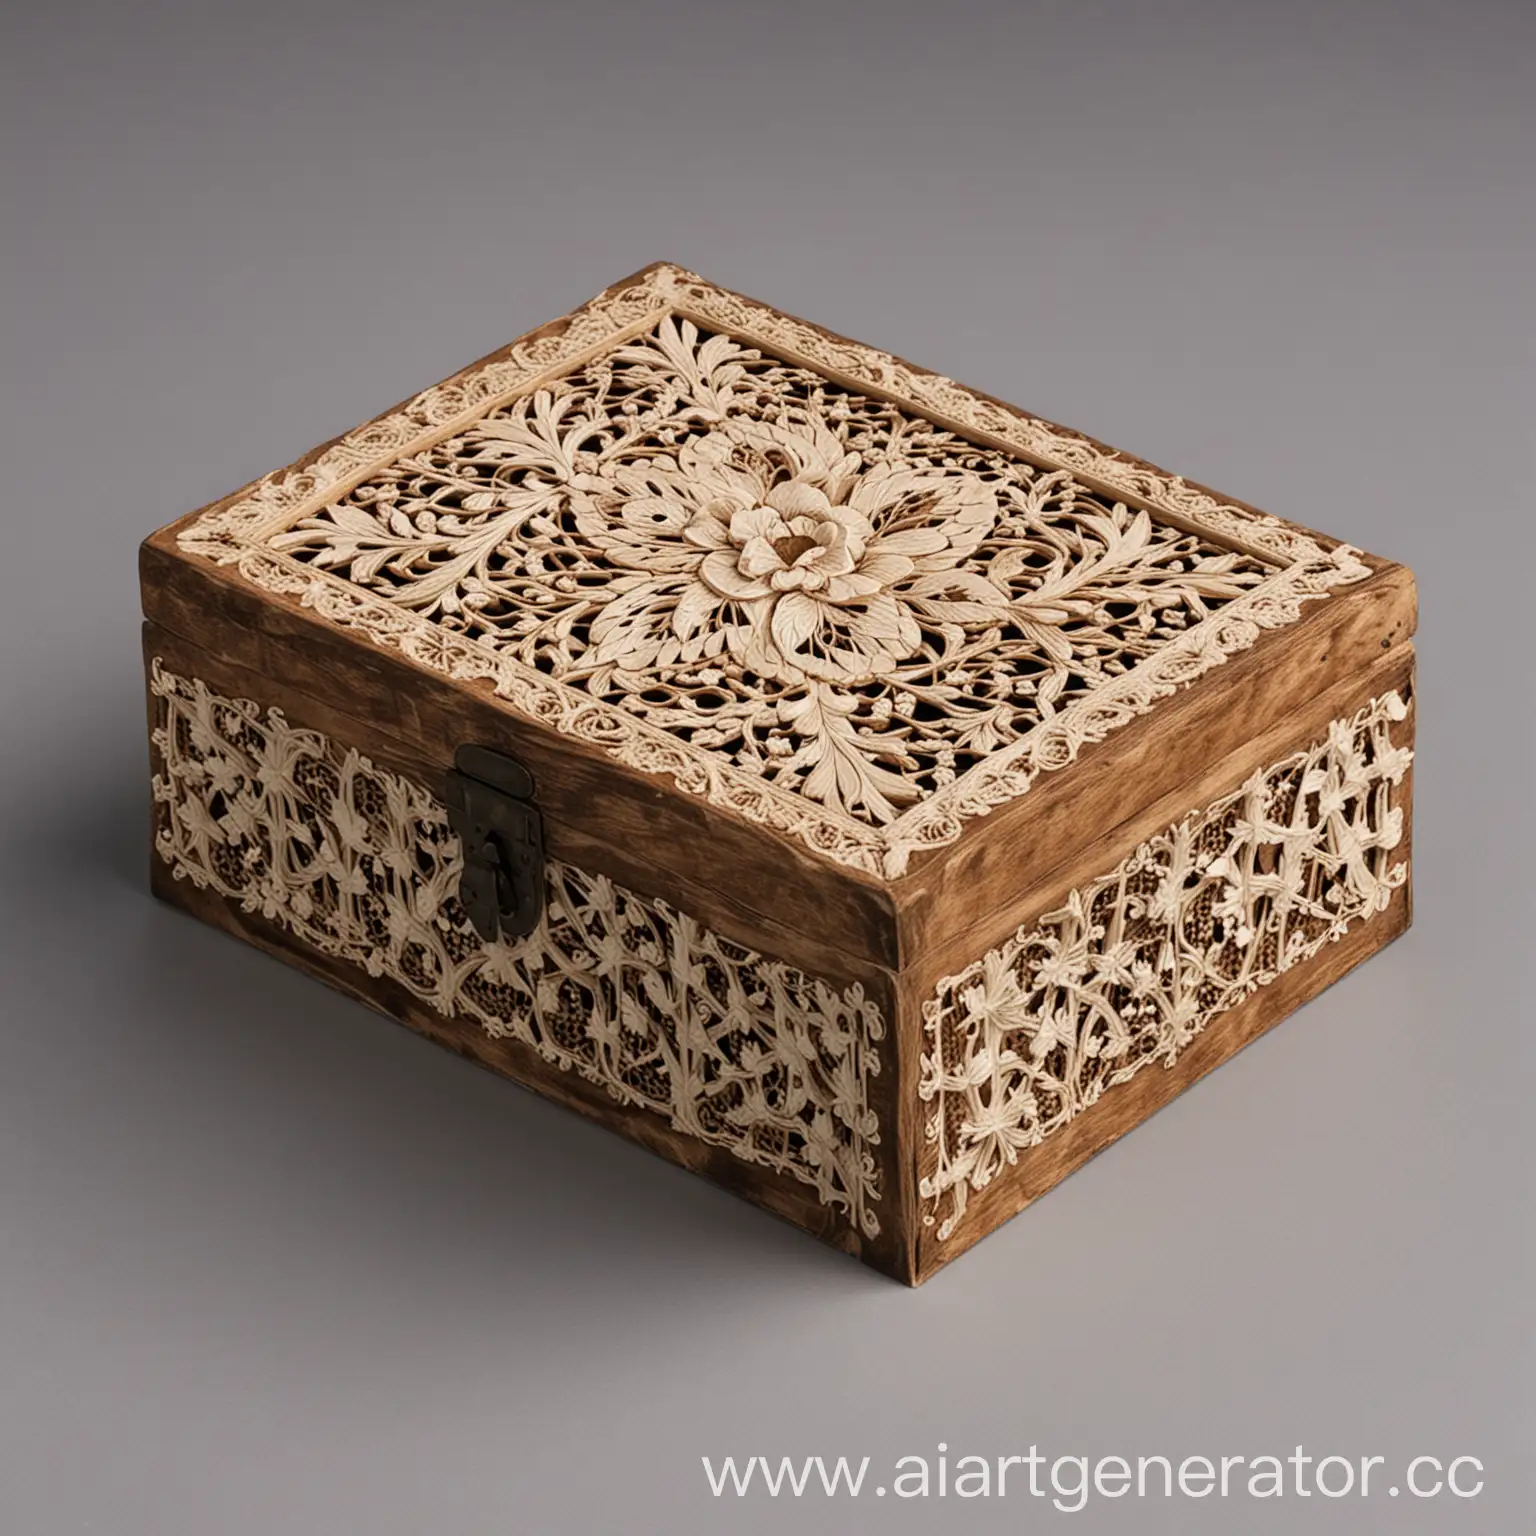 a wooden box. it has fishnet inserts made of bone. the inserts depict a floral ornament. work out the ornament in detail